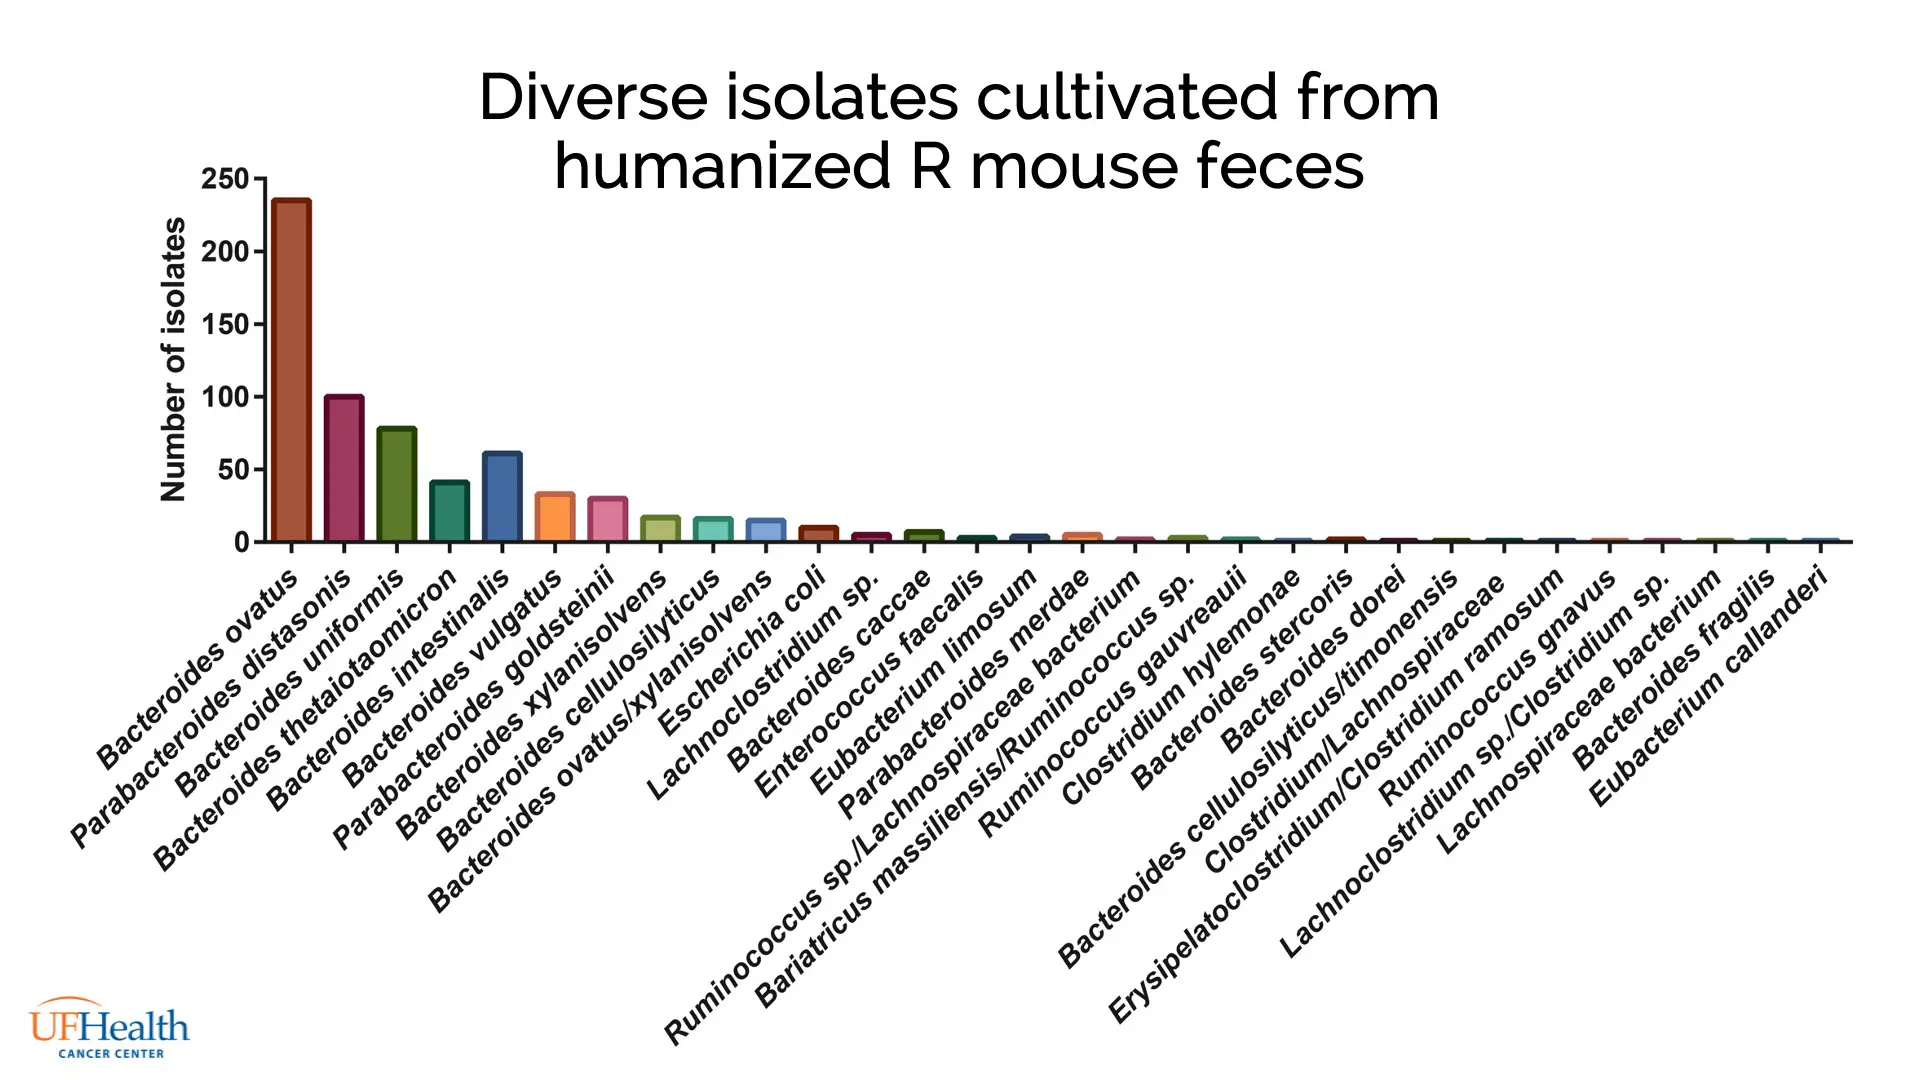 Diverse bacterial species isolated from humanized responder mouse feces using the Prospector®